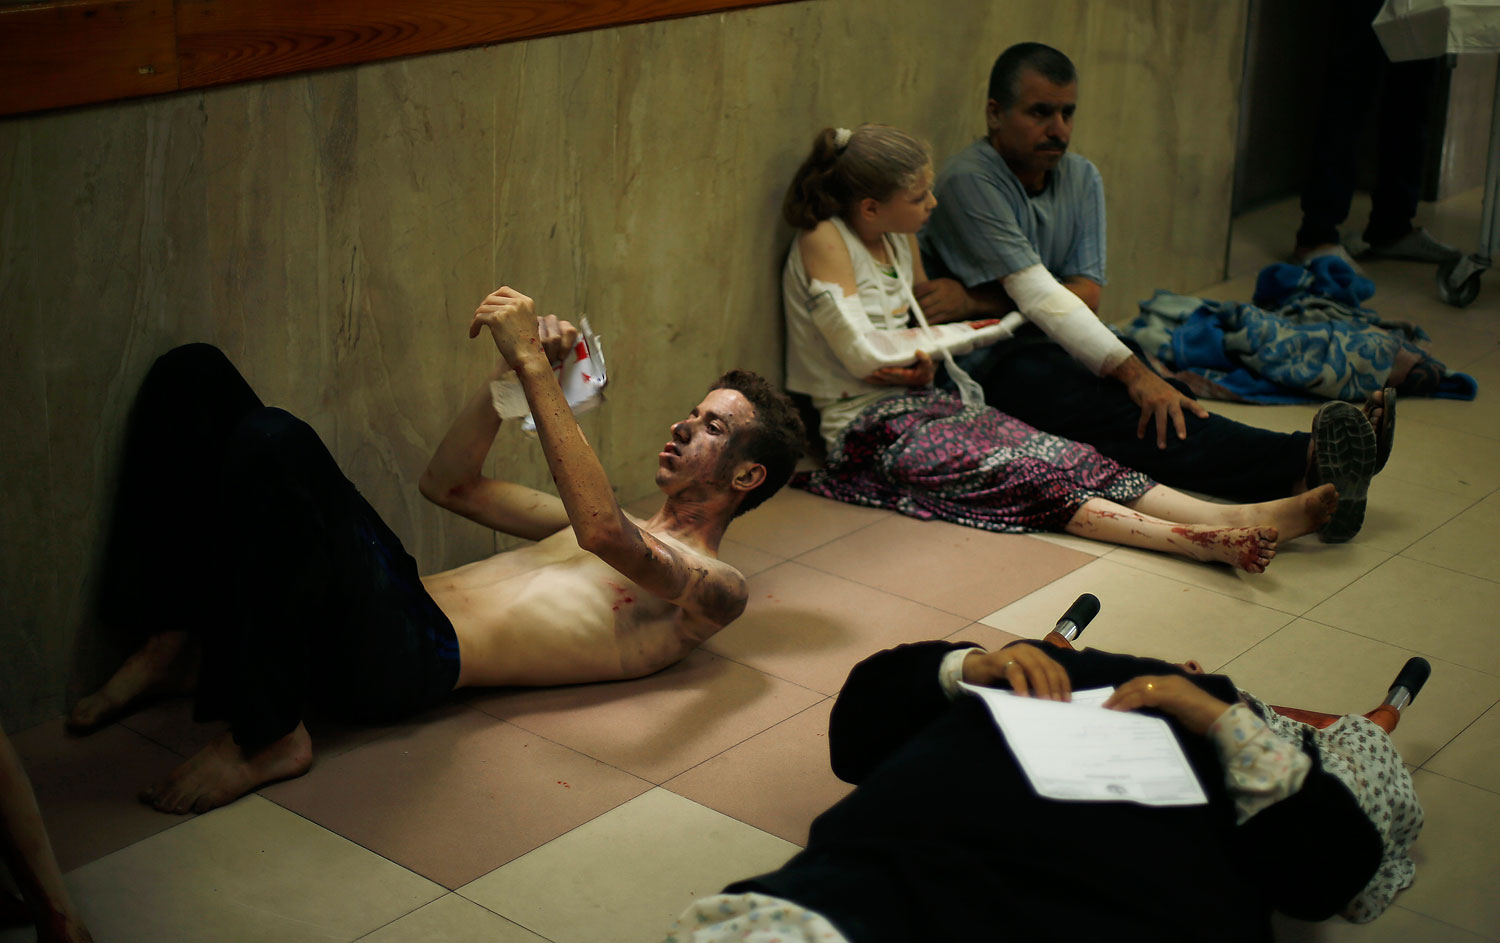 Palestinians, who medics said were wounded during heavy Israeli shelling, sit at a hospital in Gaza City July 20, 2014.